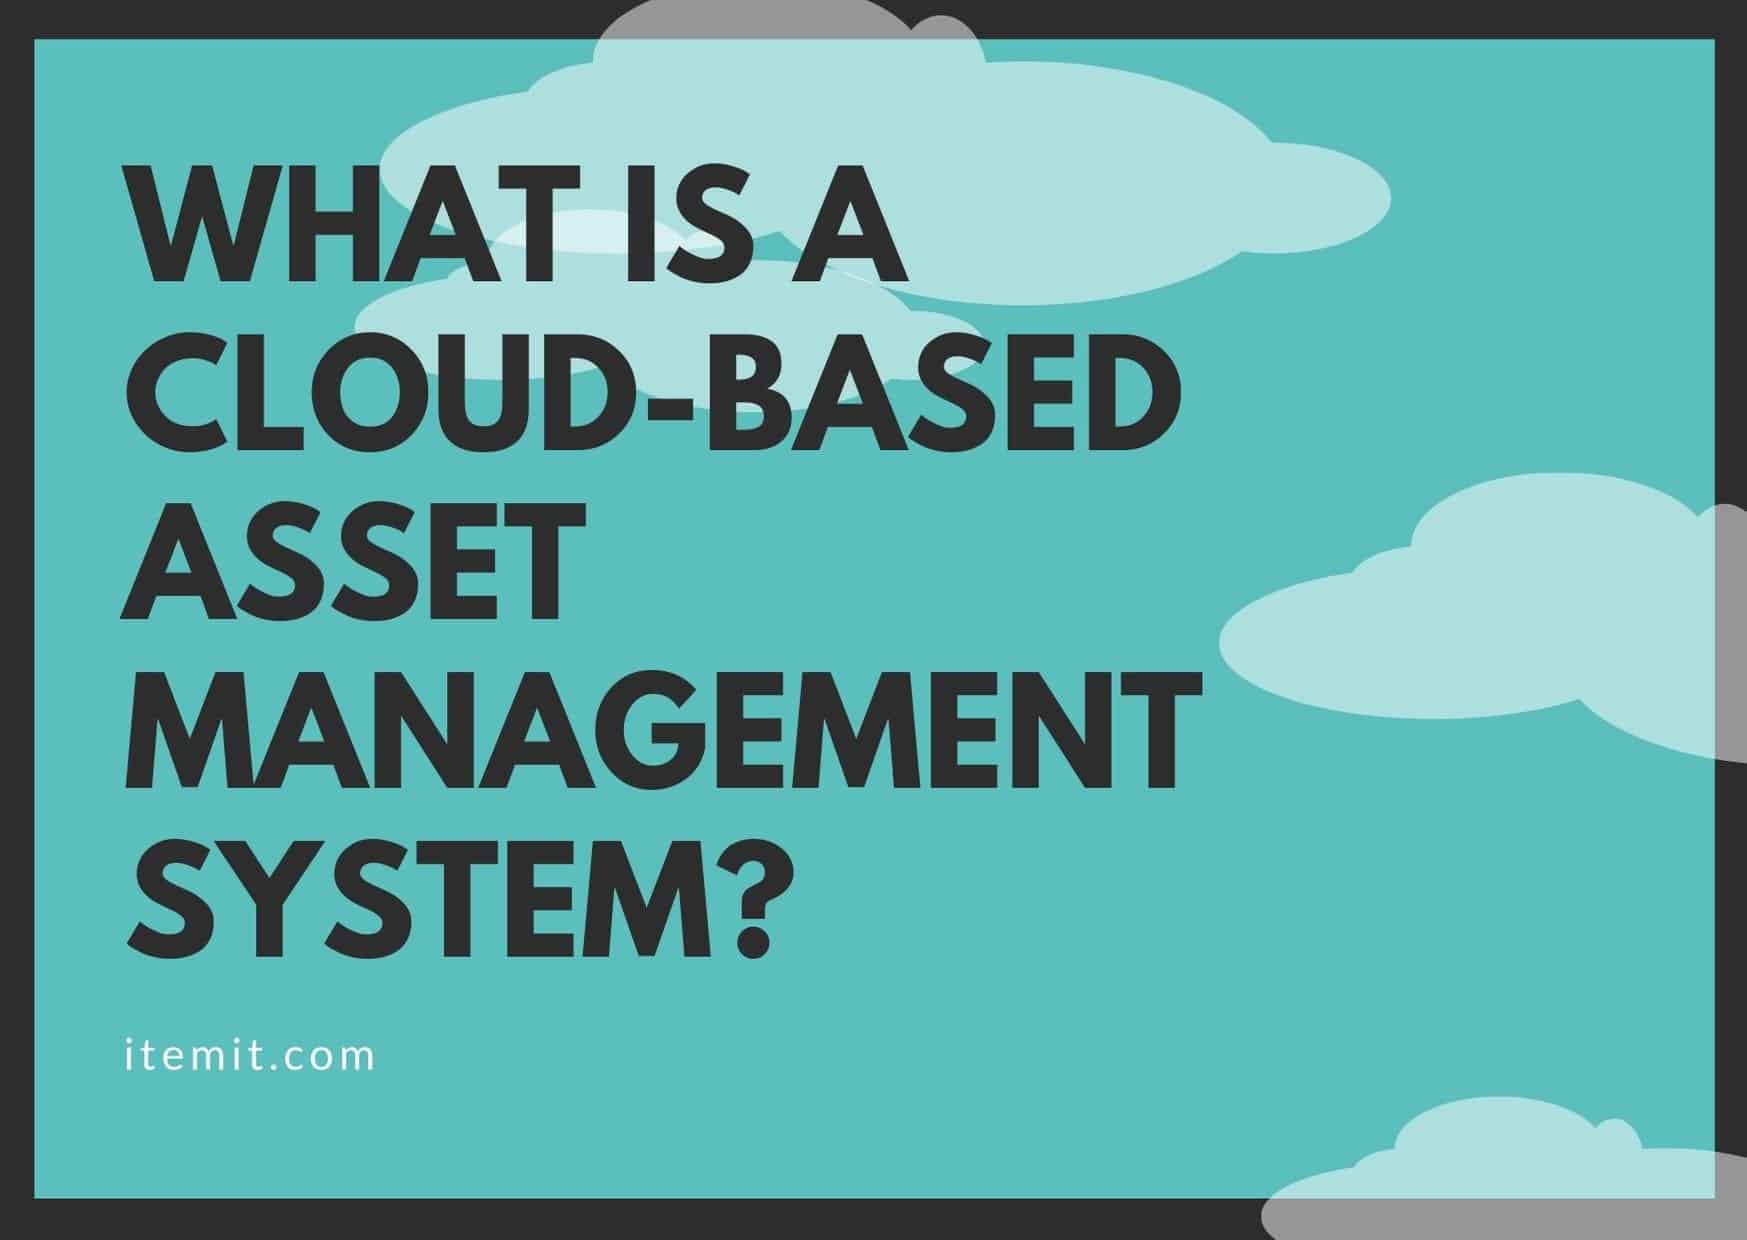 what is a cloud-based asset management system?